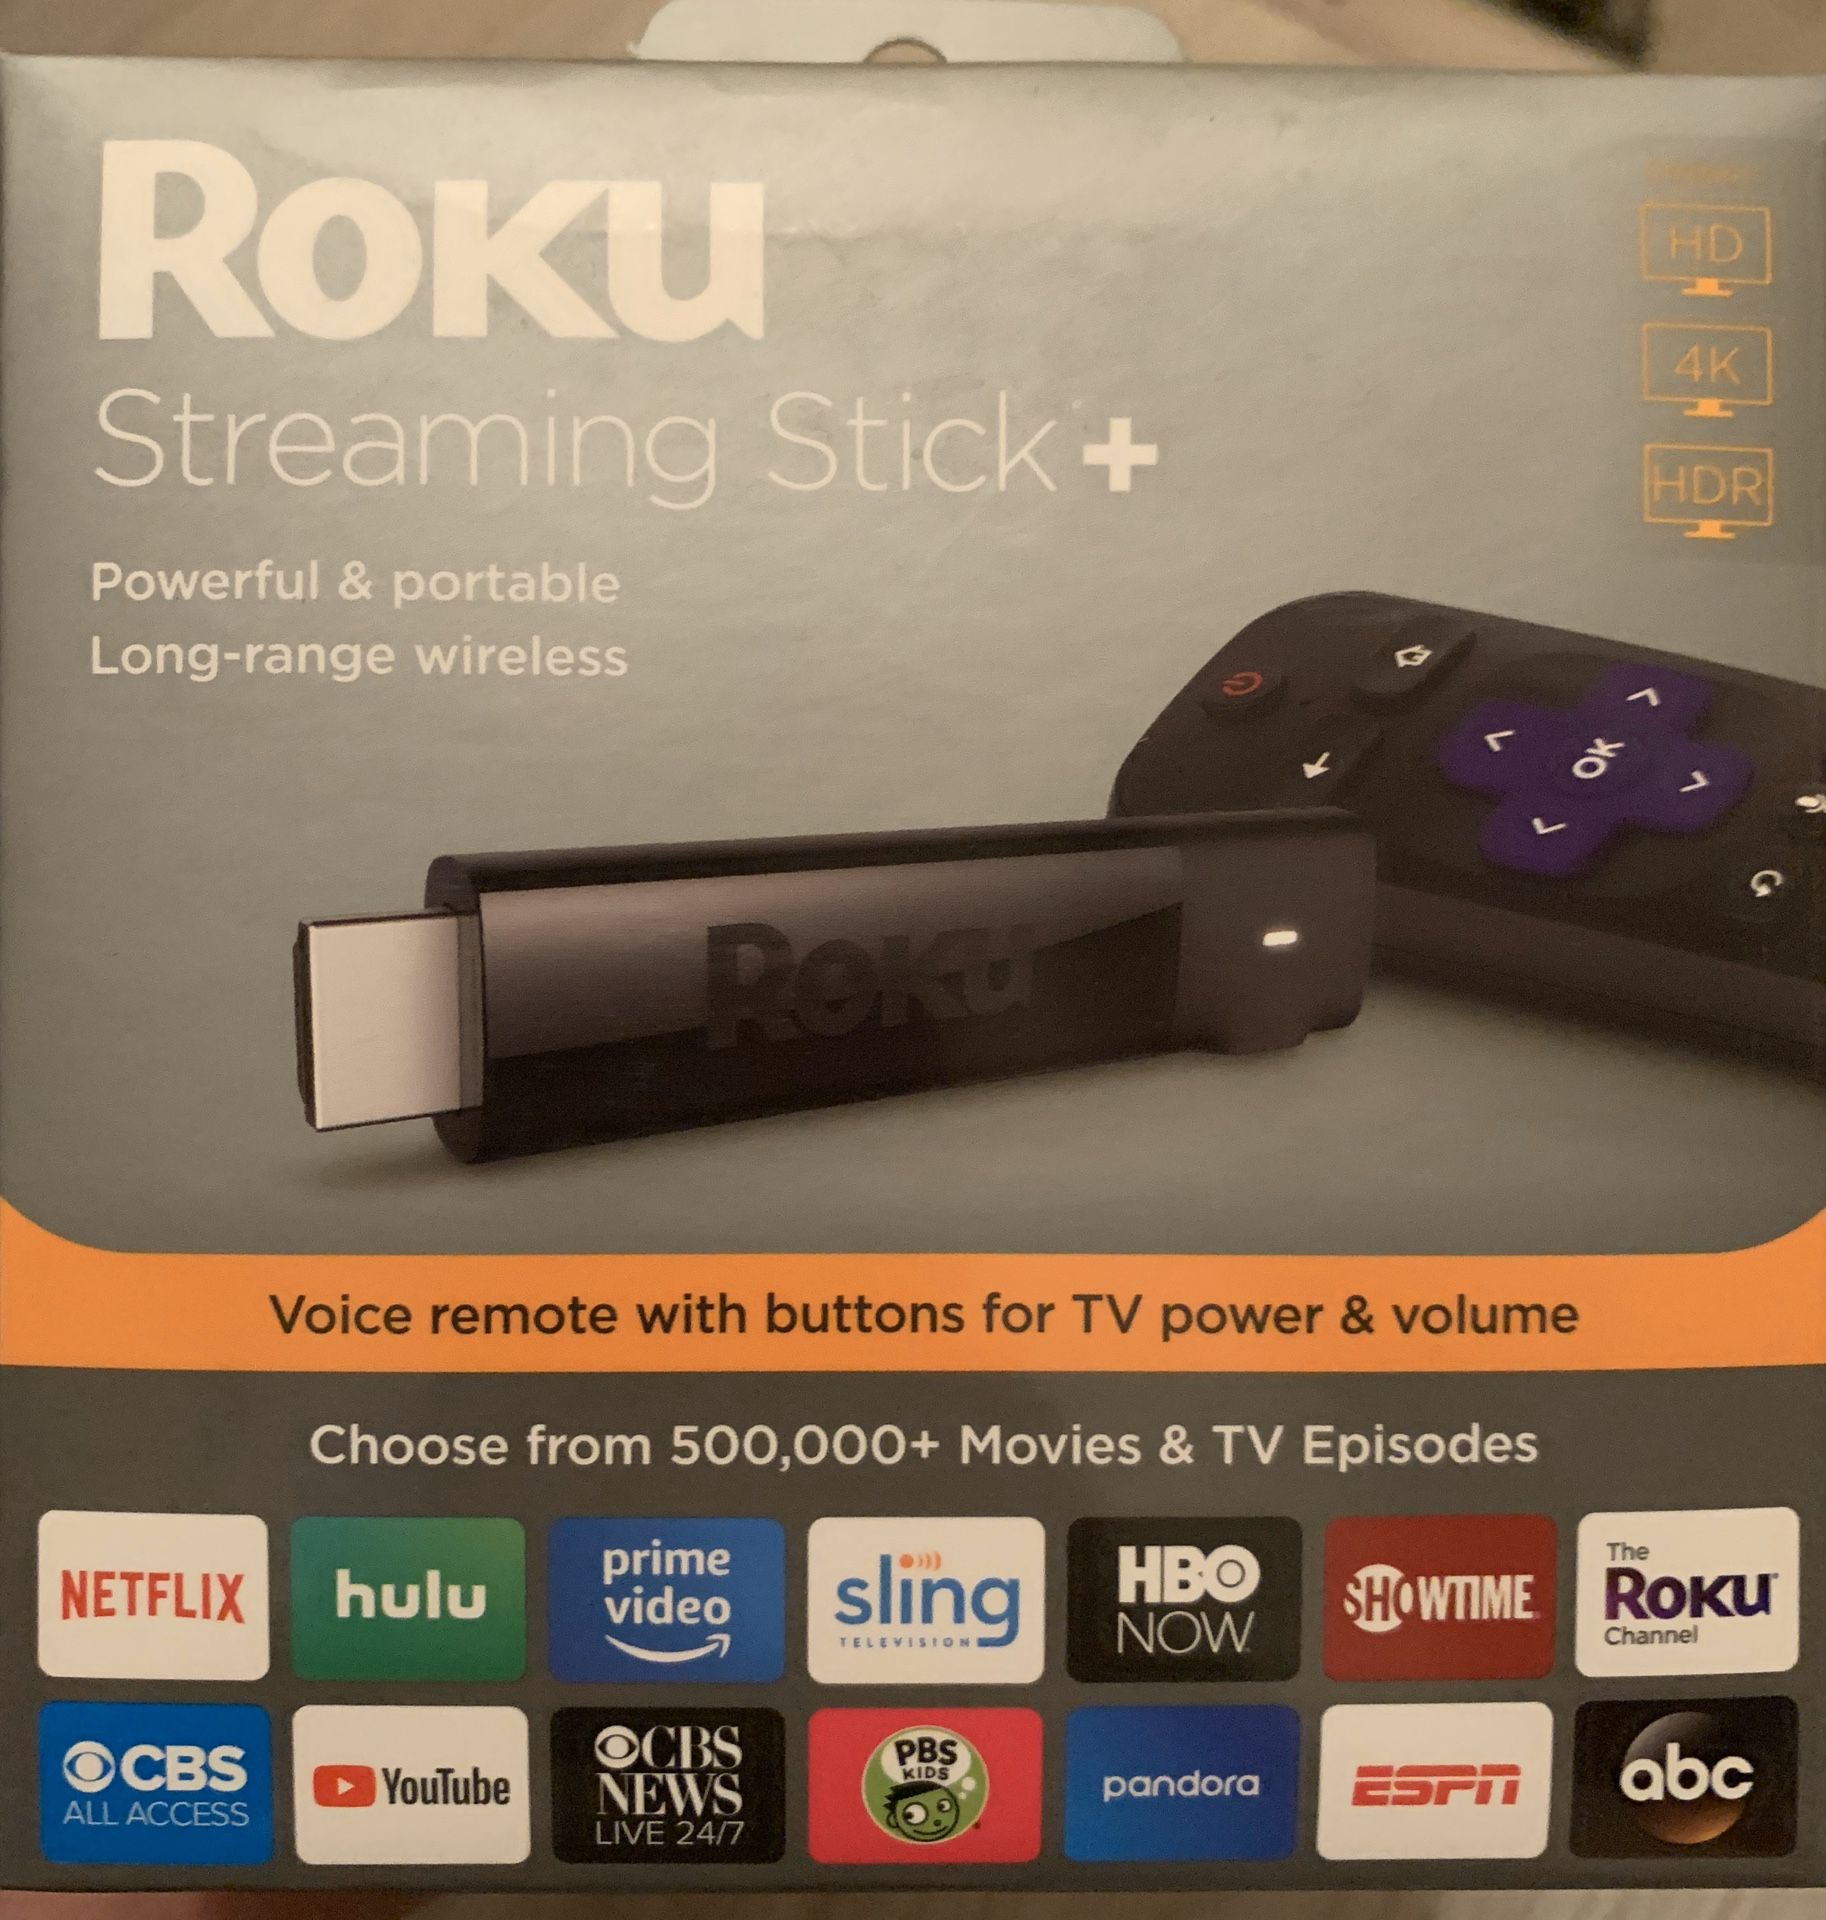 Roku 4K Ultra HD HDR Media Streaming Stick+ with Voice Remote - 3810R